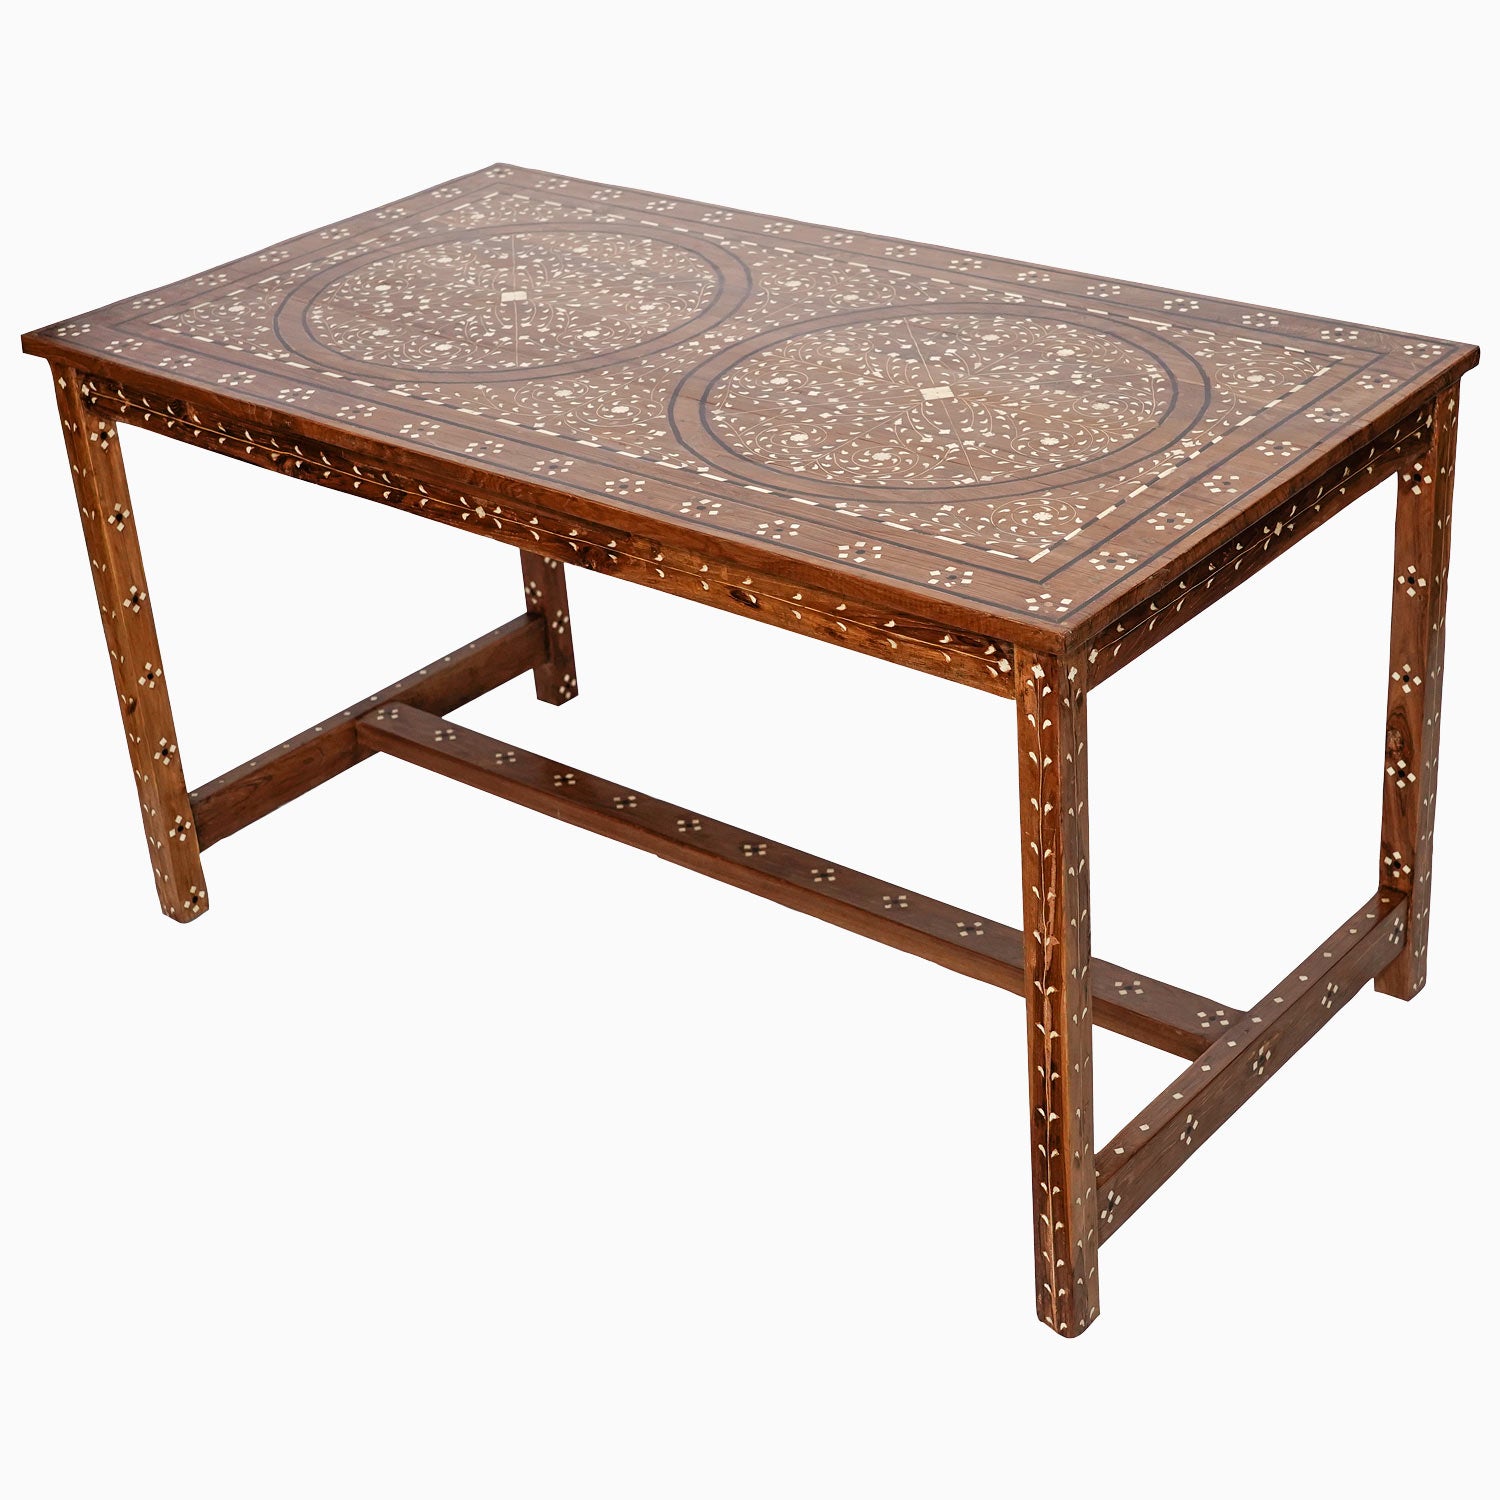 Wooden Inlay Table 1 Main